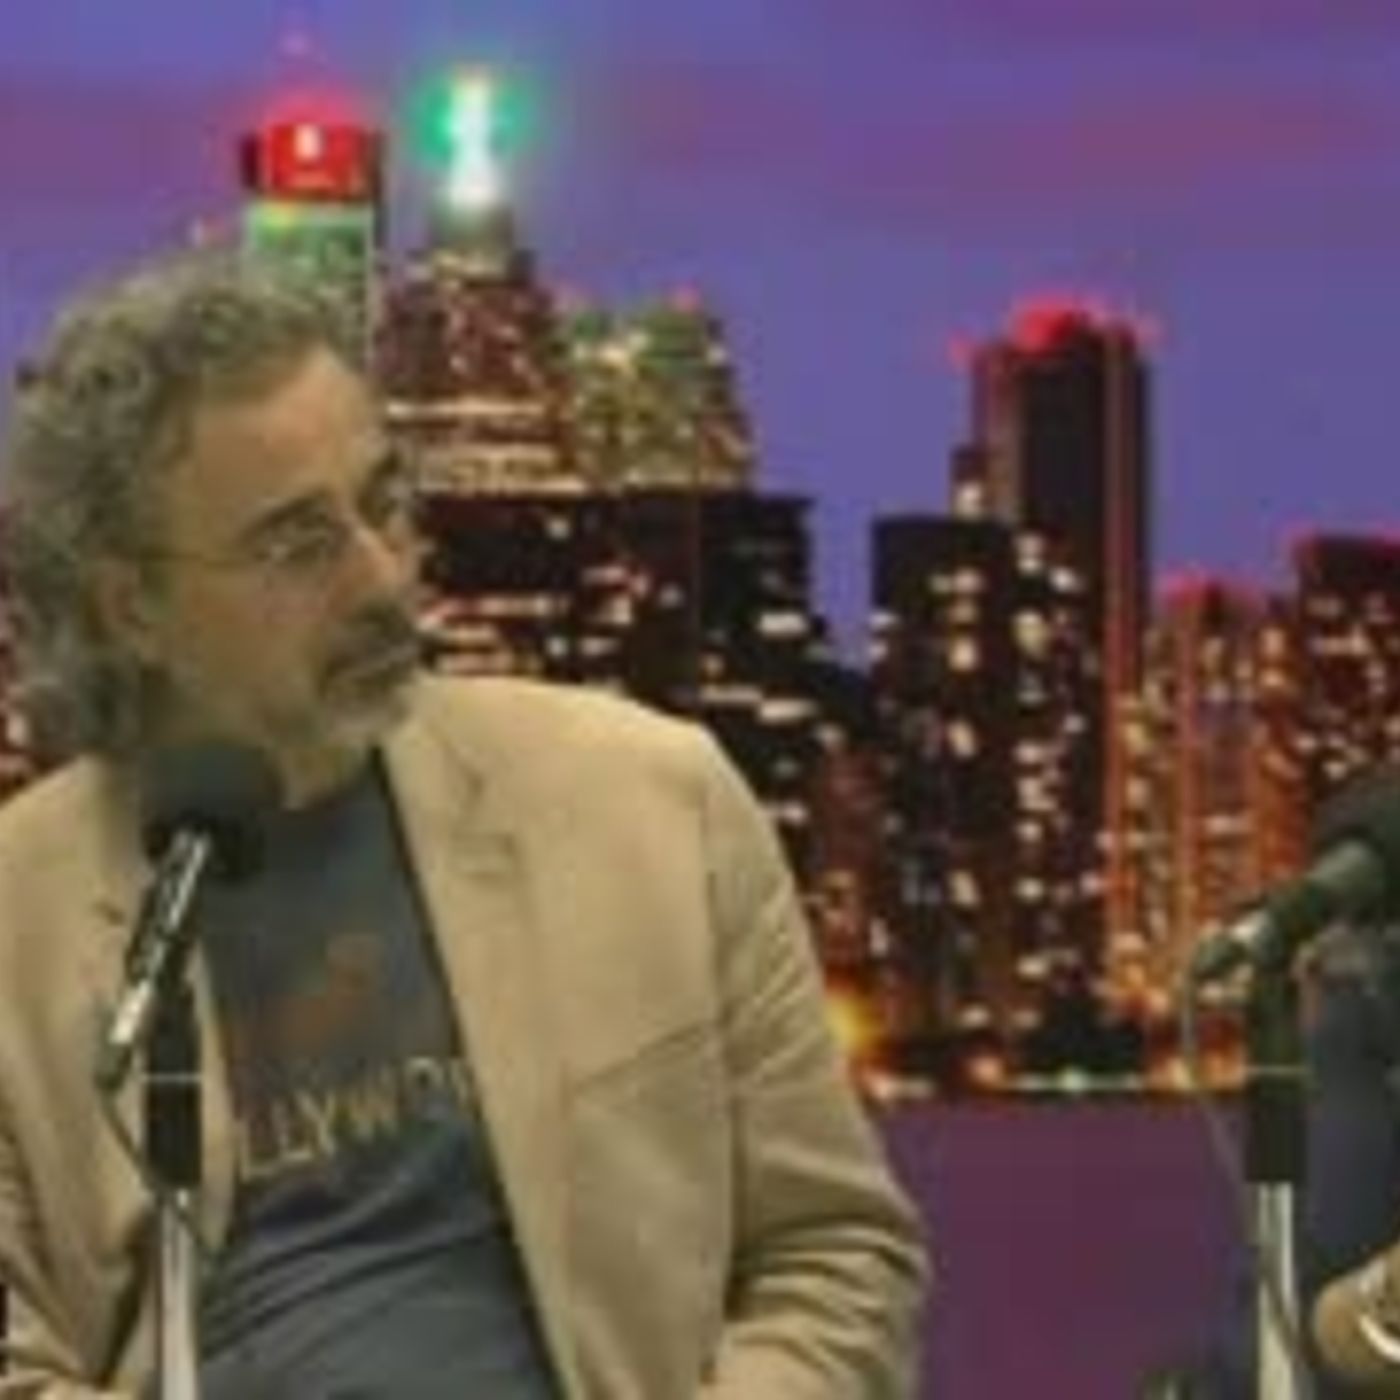 Richard Dolan and Linda Moulton-Howe on UFOs and Alien Theories